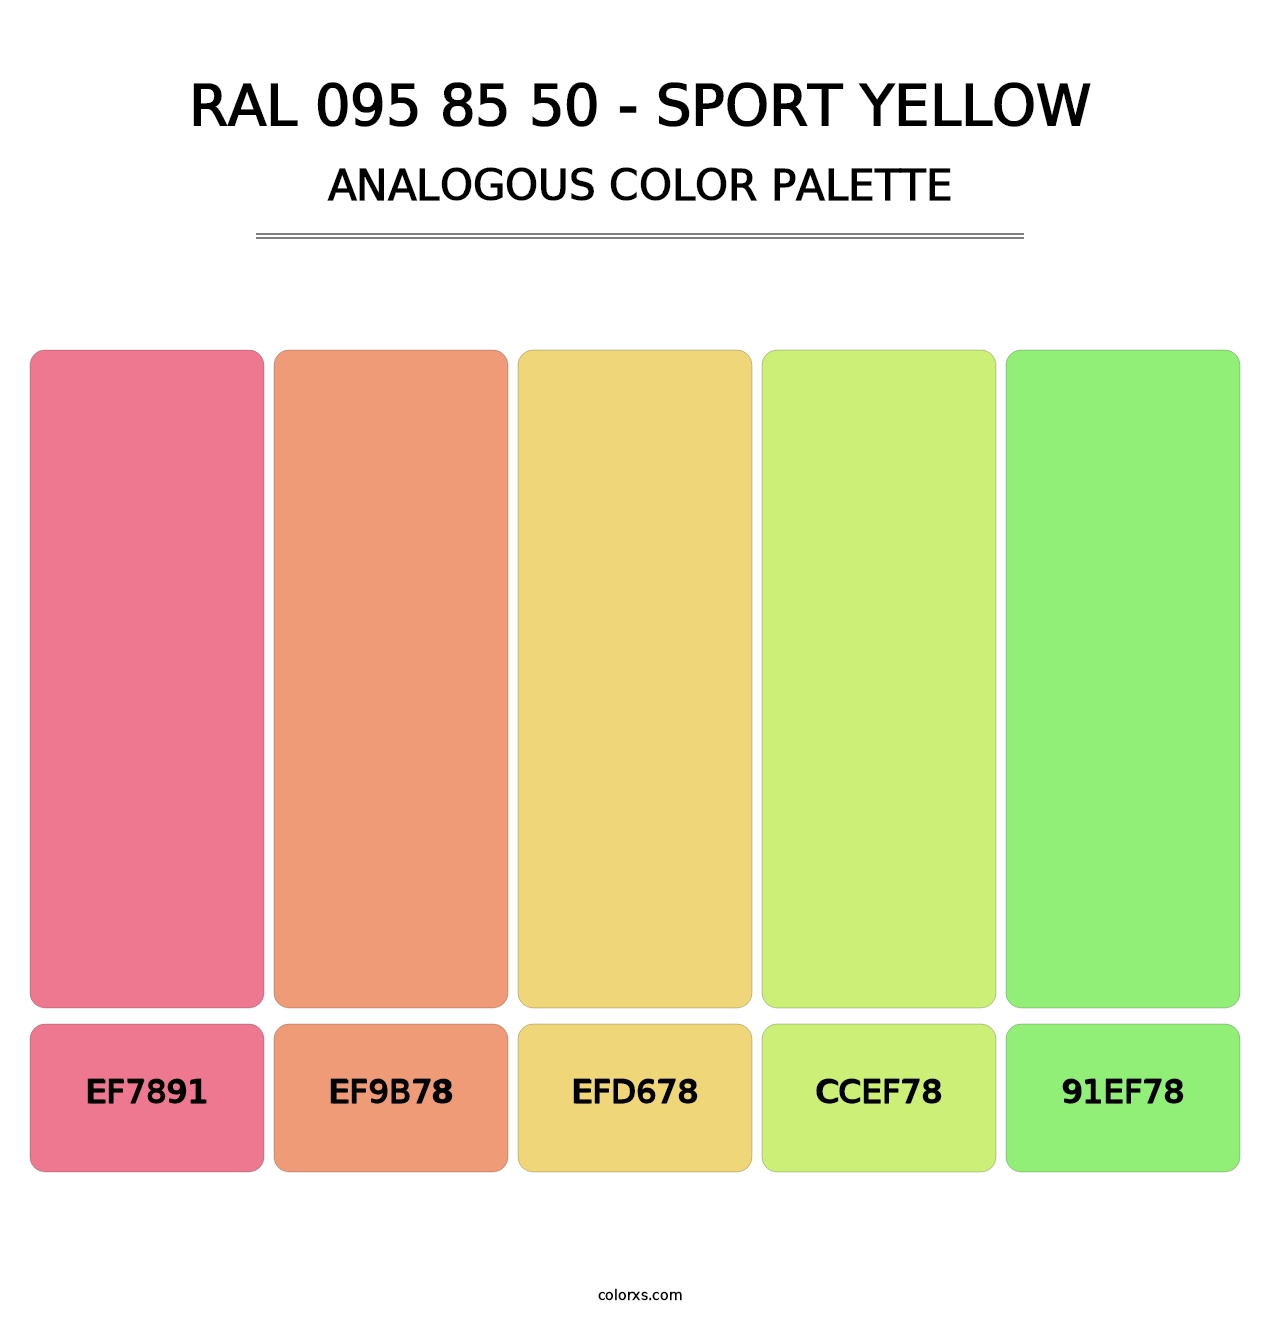 RAL 095 85 50 - Sport Yellow - Analogous Color Palette